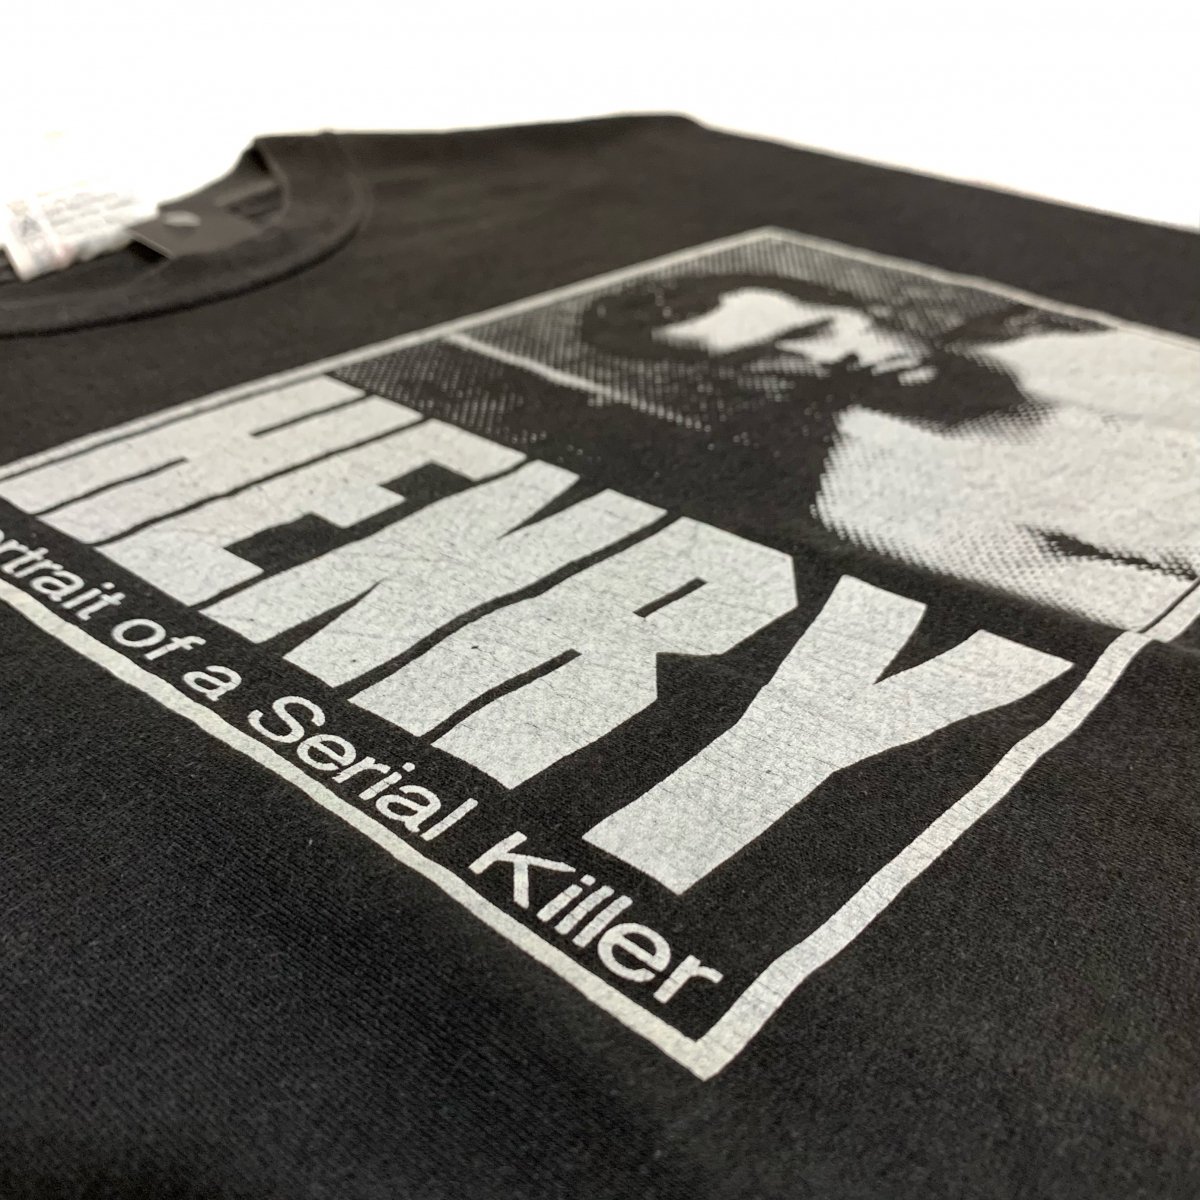 USA製 90年 Henry: Portrait of a Serial Killer S/S Tee 黒 XL 80s